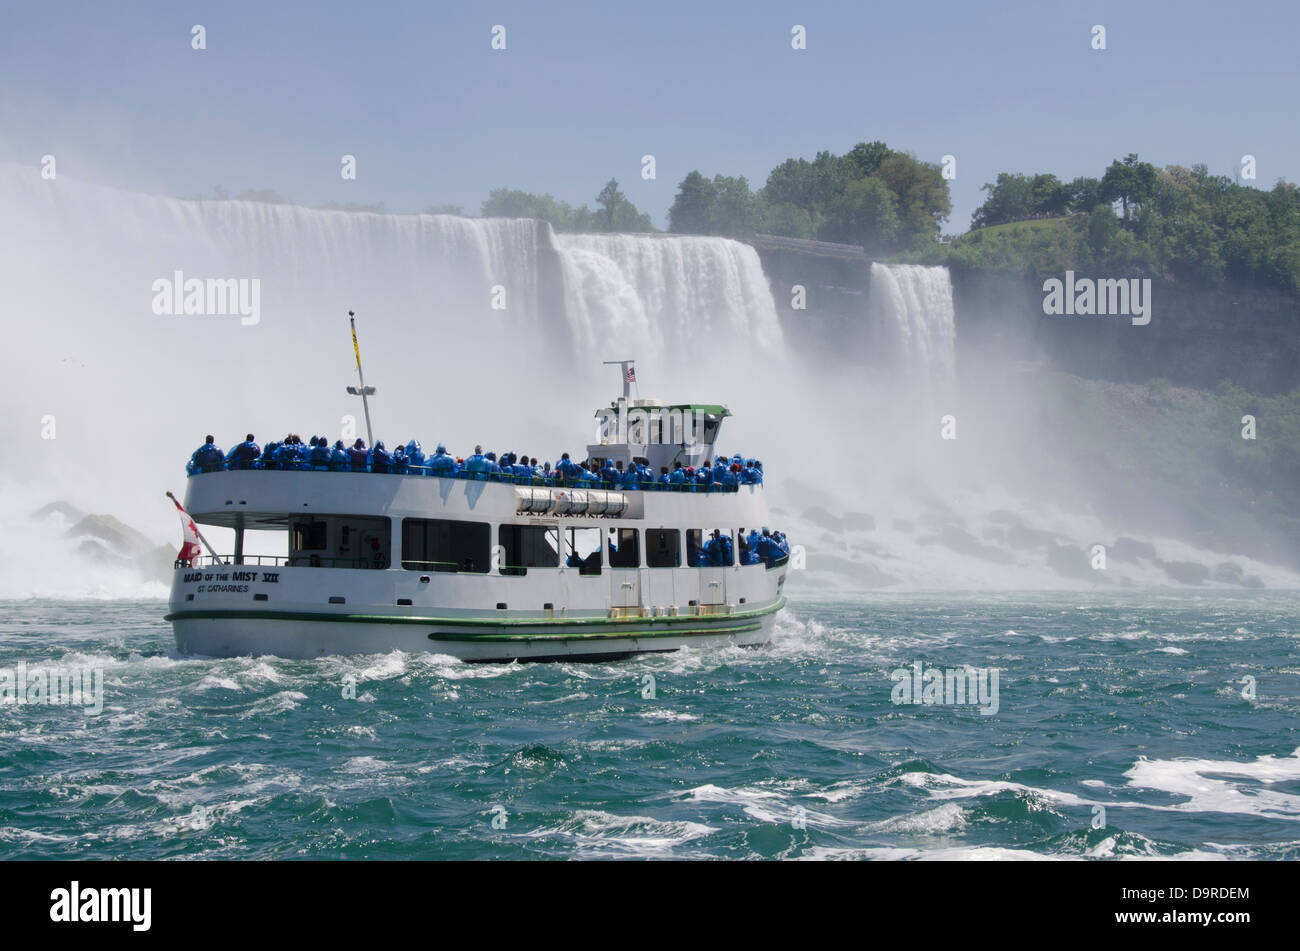 USA / Canada, New York, Niagara Falls. USA side, view of American Falls with Maid of the Mist tourist boat. Stock Photo